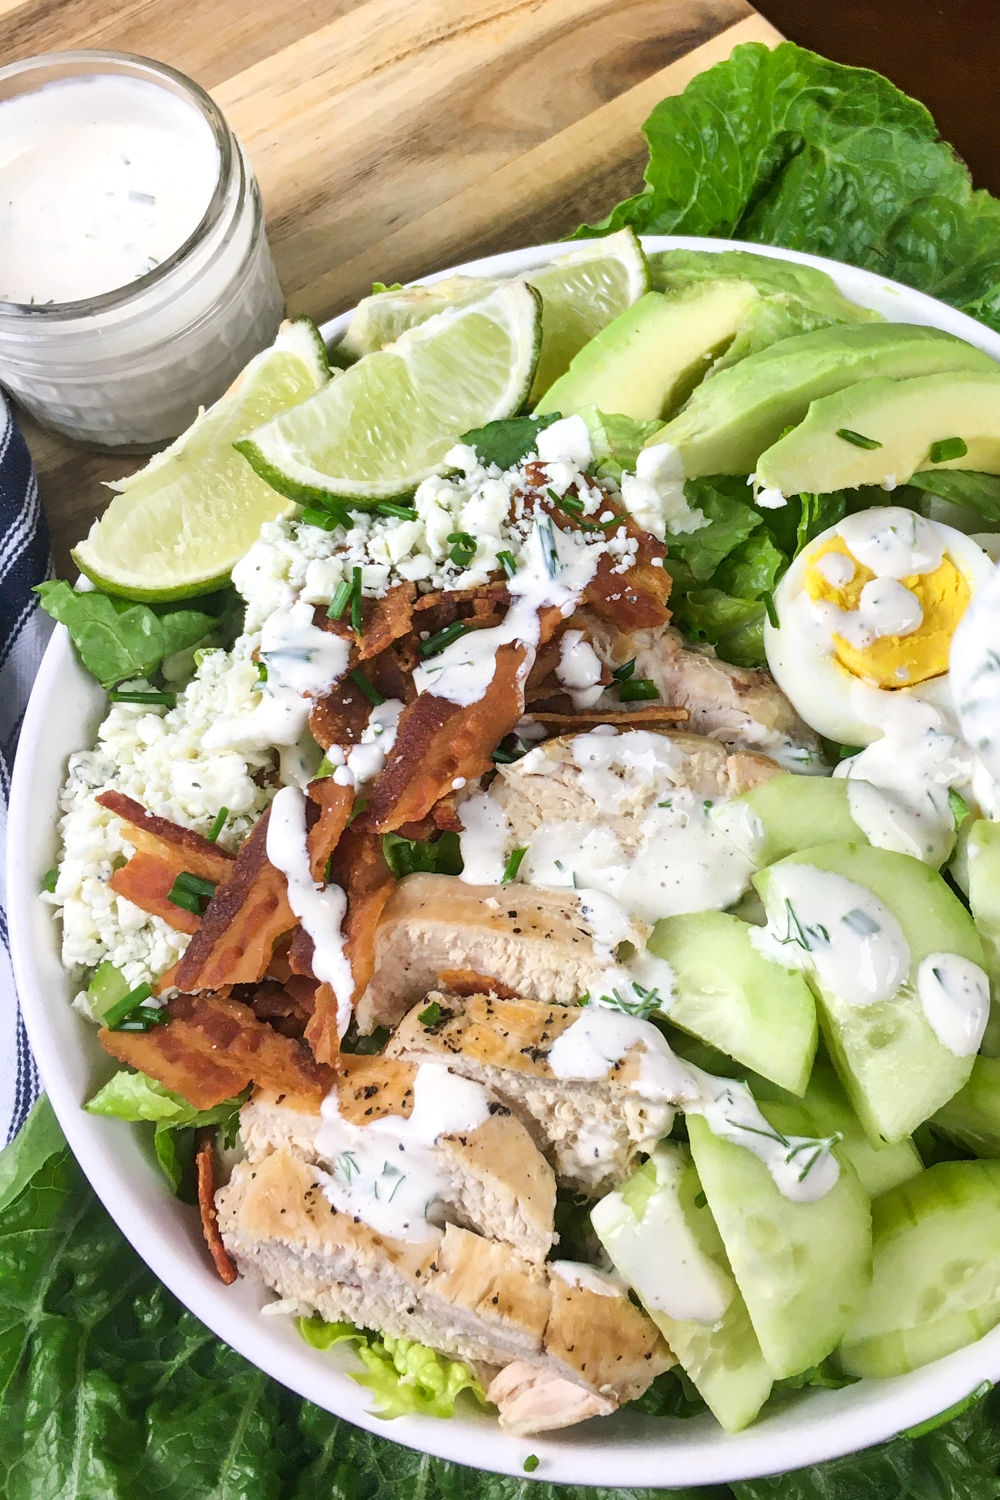 A tasty keto cobb salad with homemade ranch dressing. It's loaded with protein, fat and good-for-you veggies! Plus it's easy to make at home.